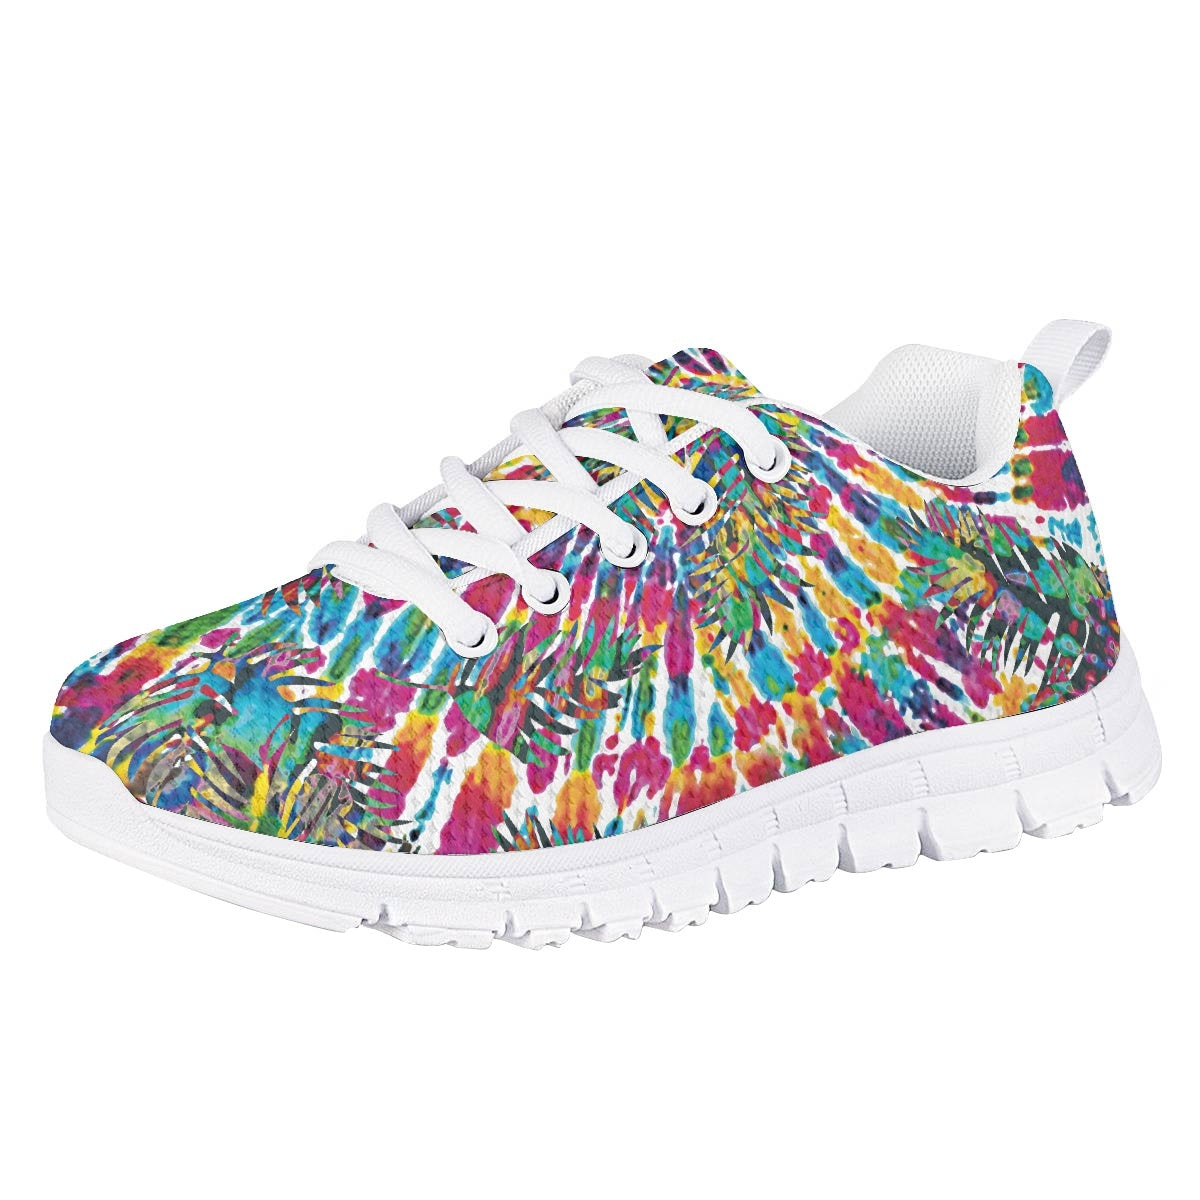 Colorful Tie Dye Kids Running Shoes